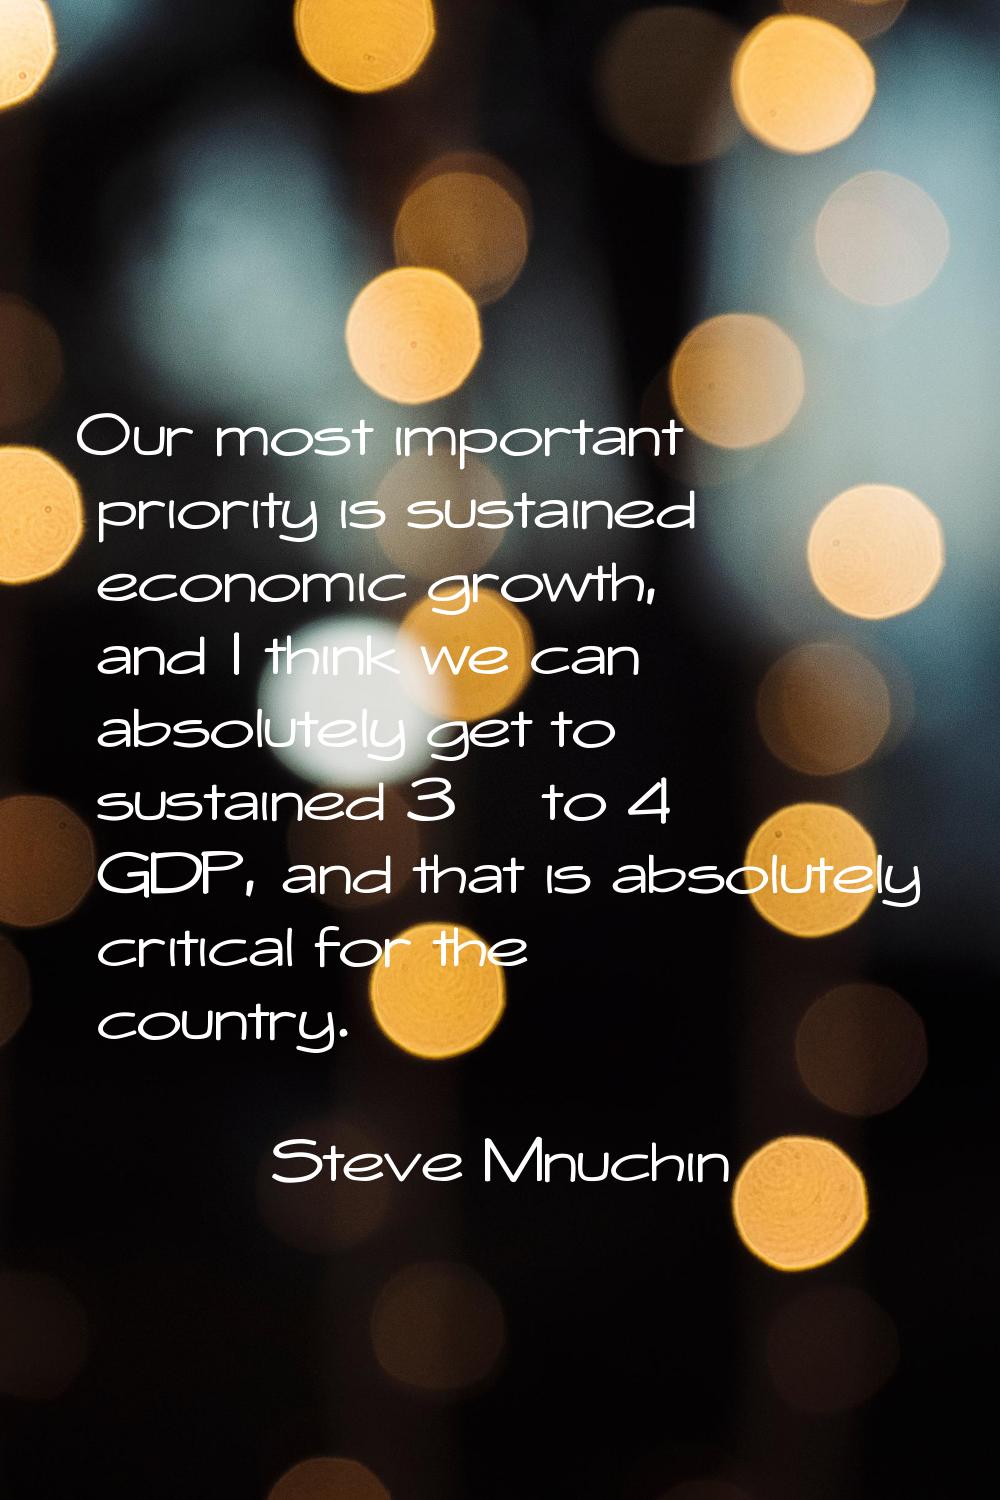 Our most important priority is sustained economic growth, and I think we can absolutely get to sust